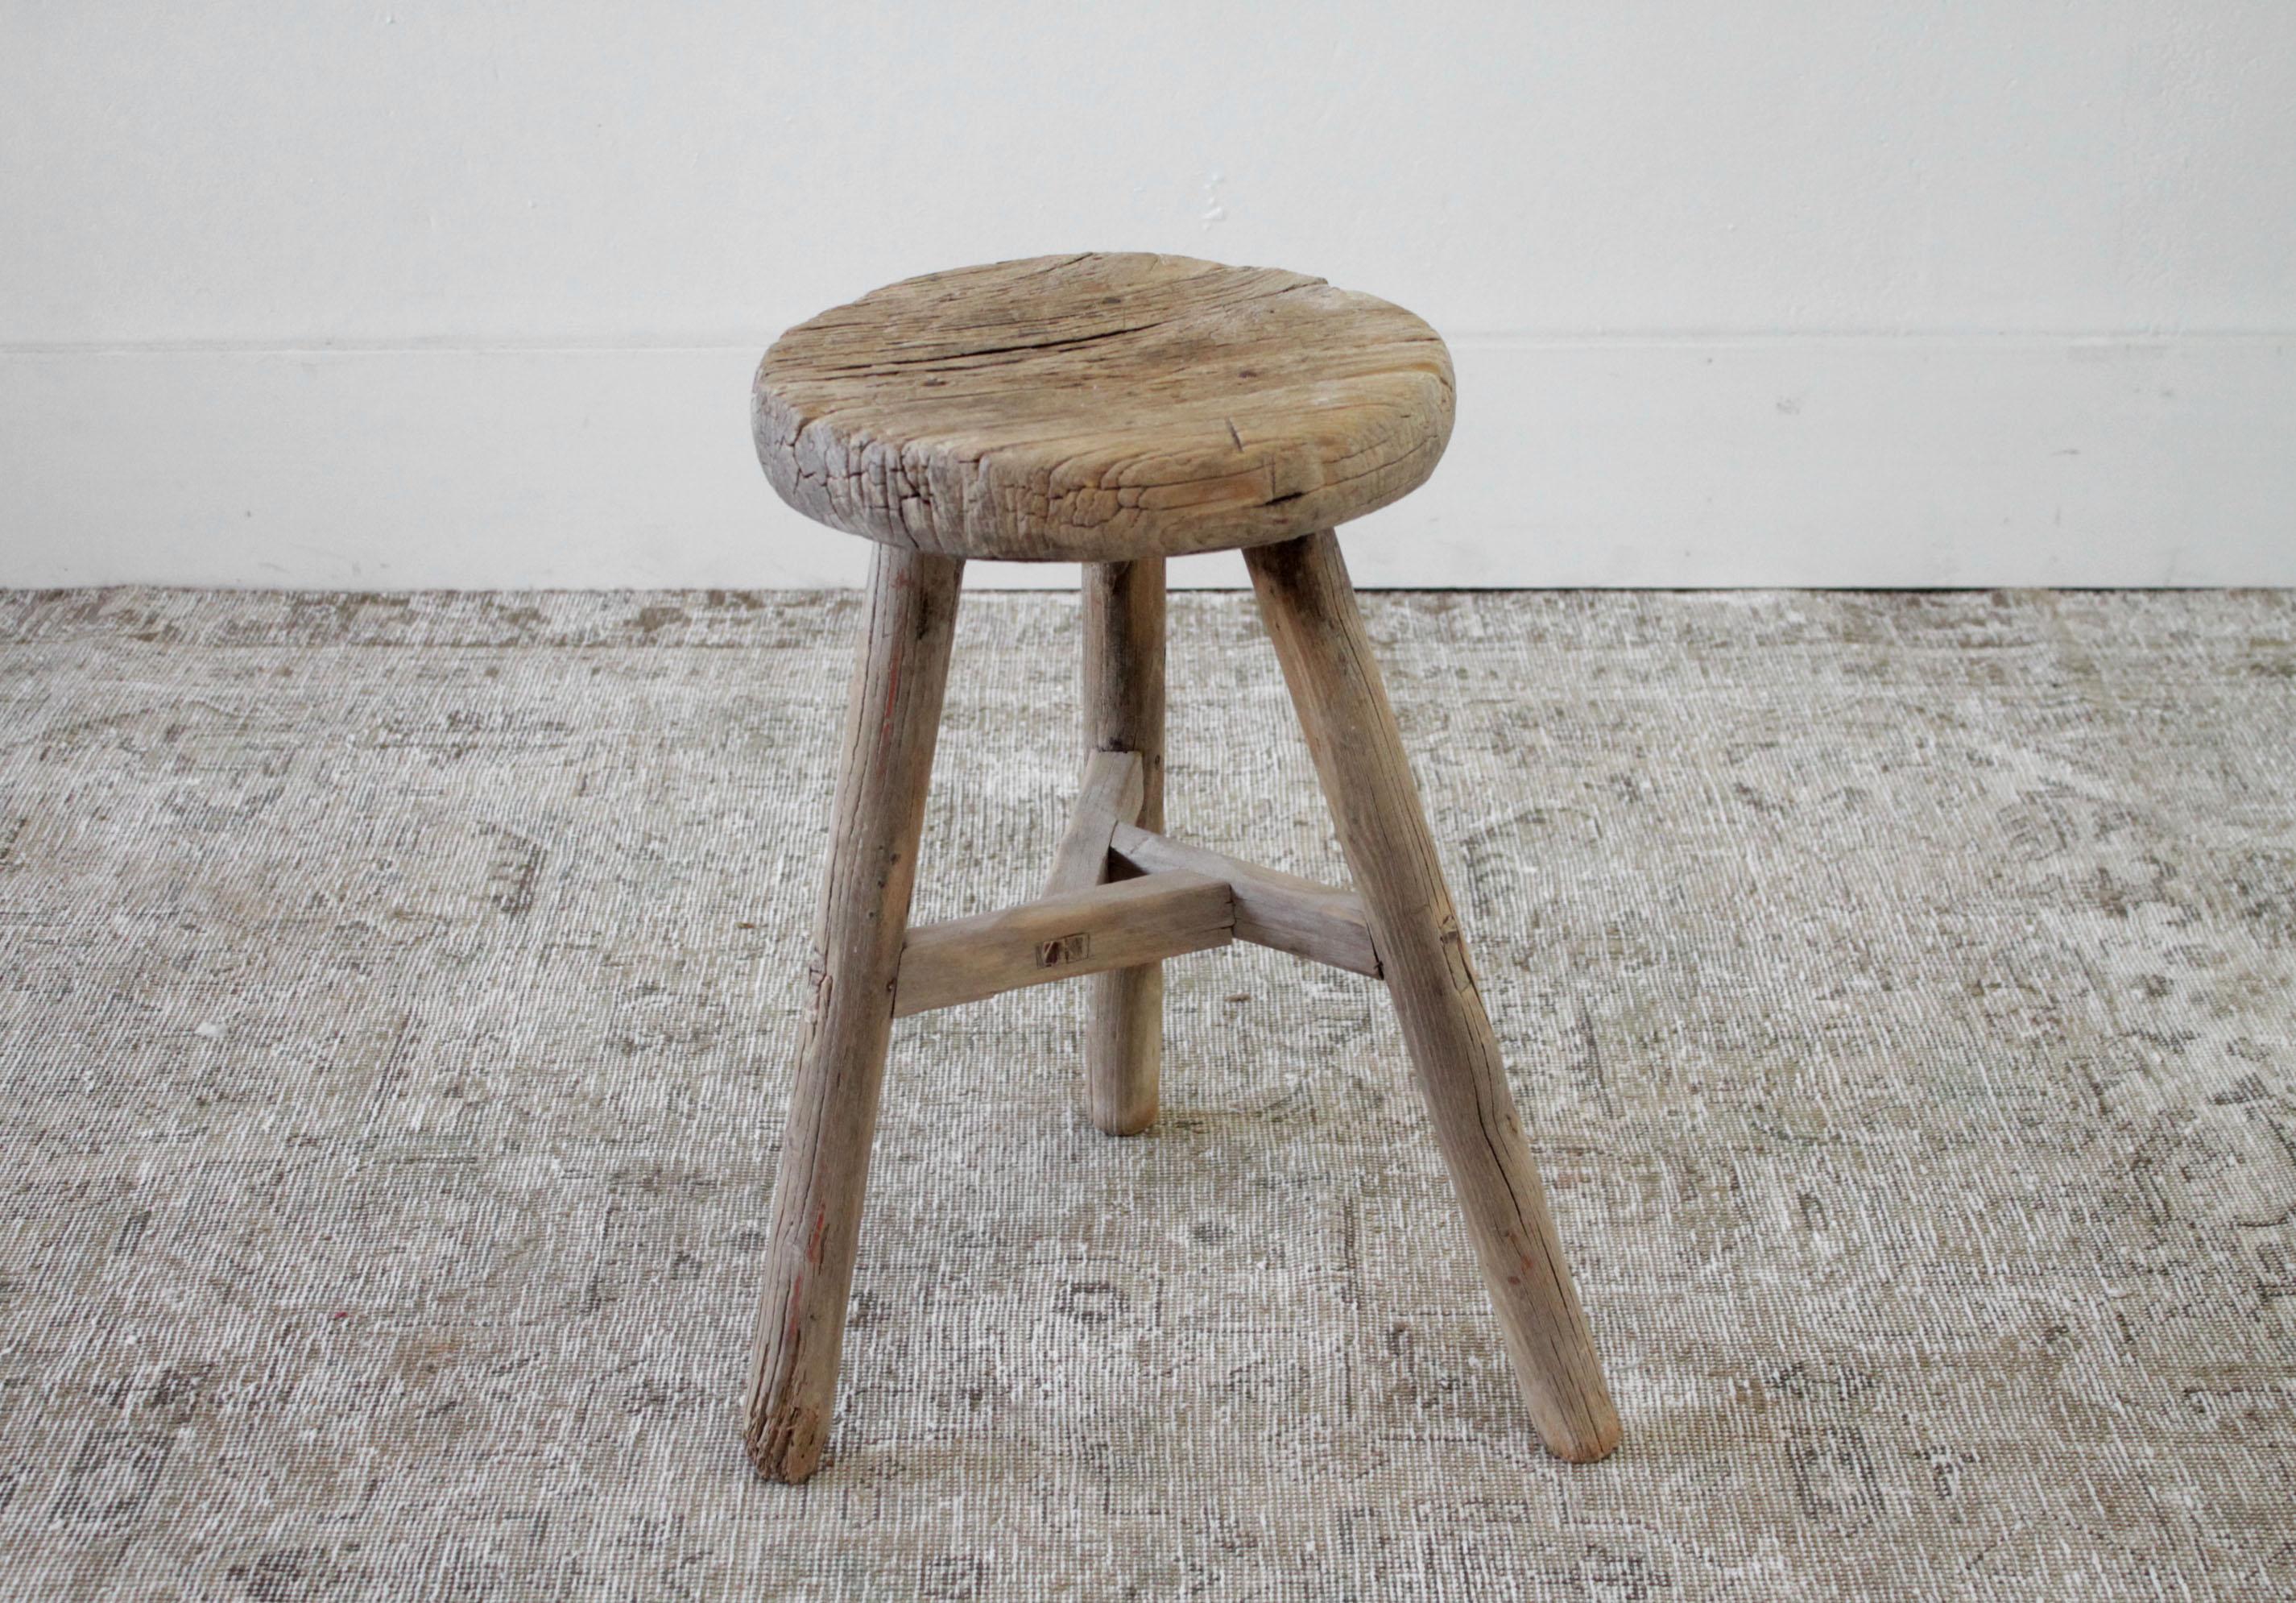 Vintage antique round elm wood stool or side table
These are the real vintage antique elm wood stools! Beautiful antique patina, with weathering and age, these are solid and sturdy ready for daily use, use as a table, stool, drink table, they are